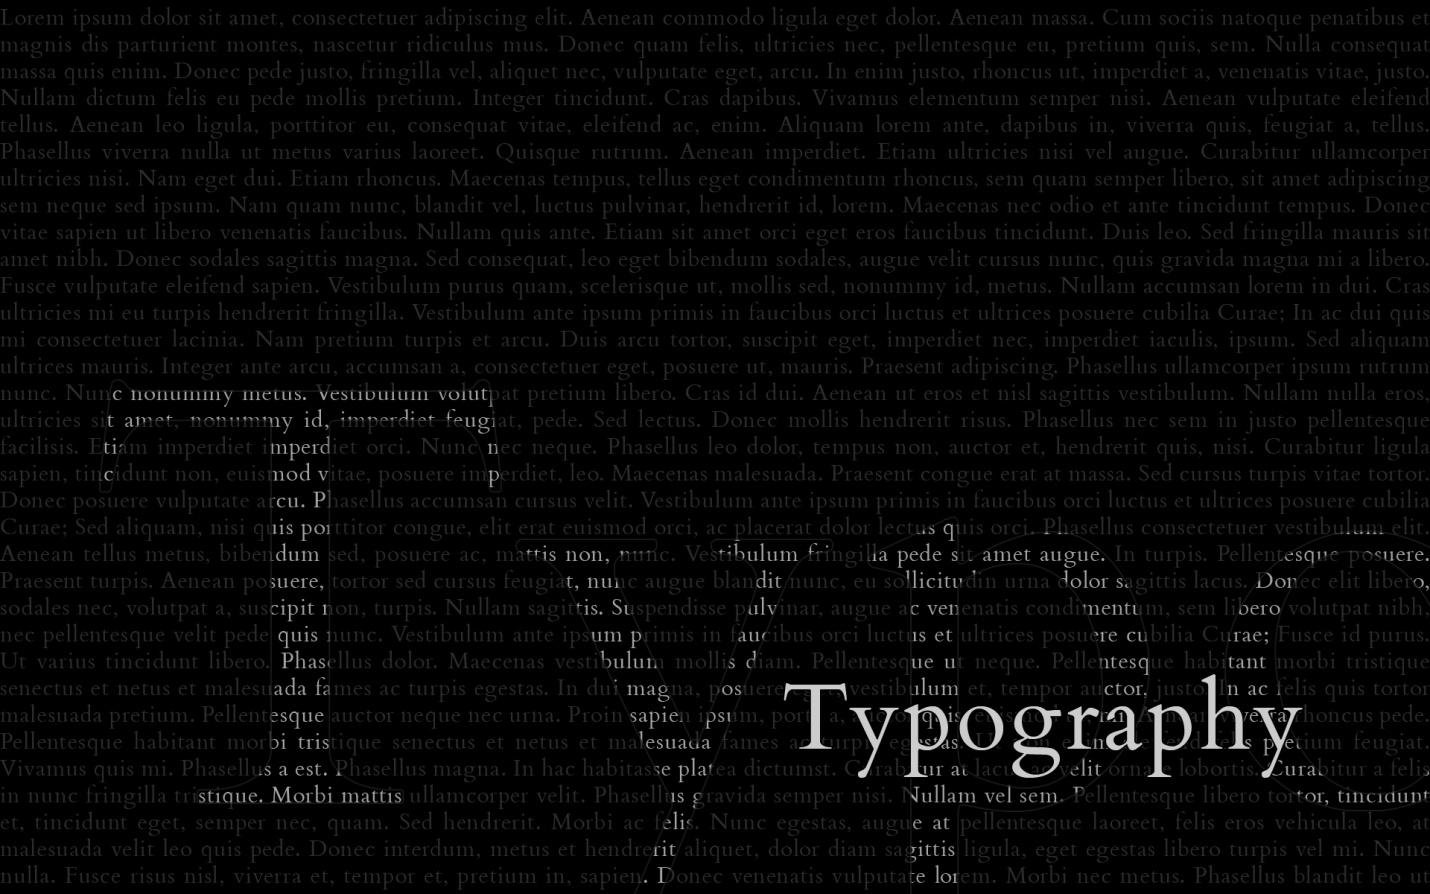 The word “Typography”